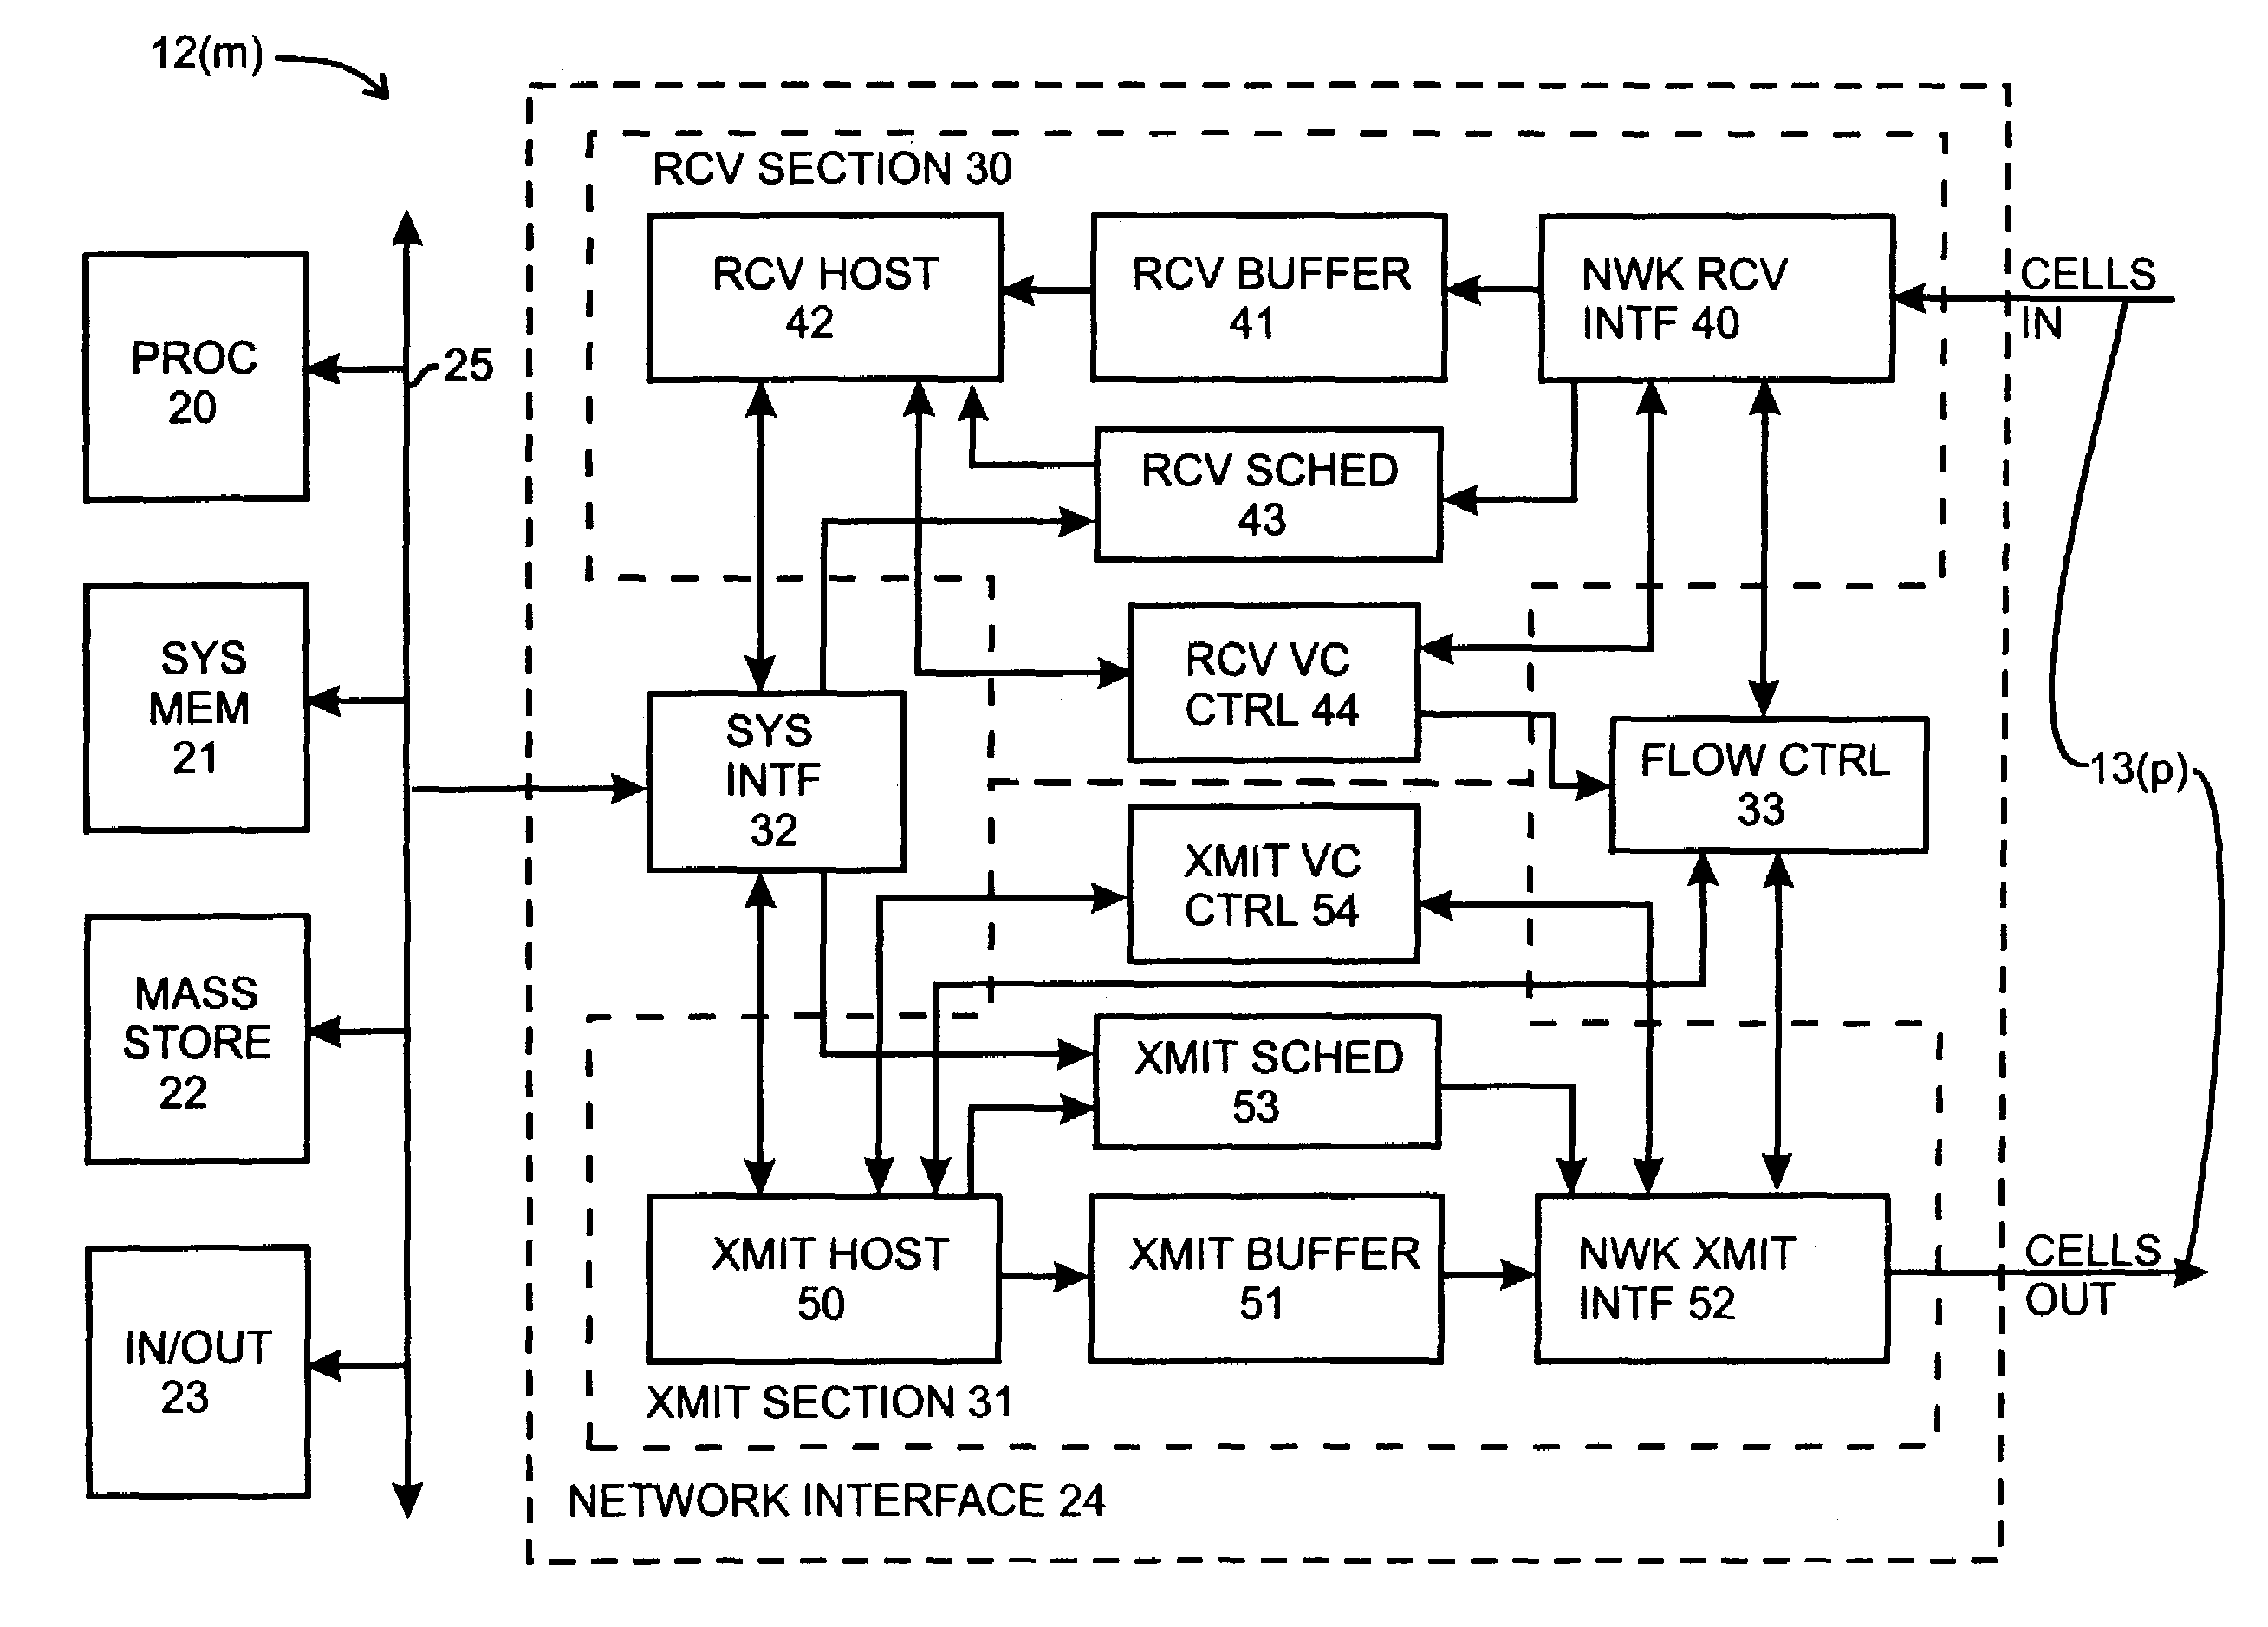 System and method for regulating message flow in a digital data network